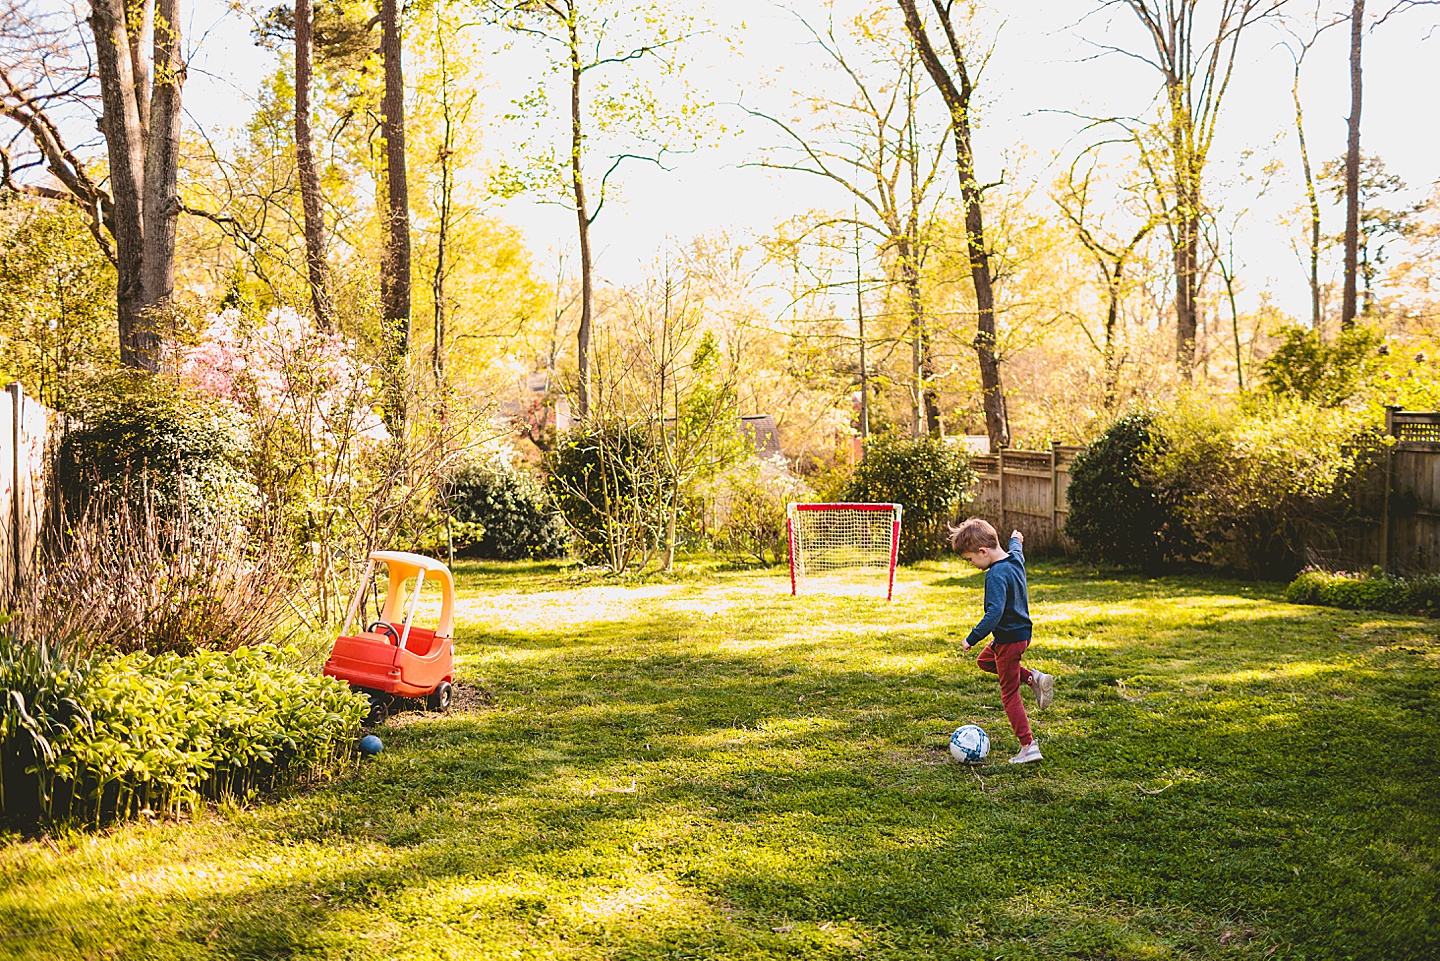 Boy playing soccer in the yard